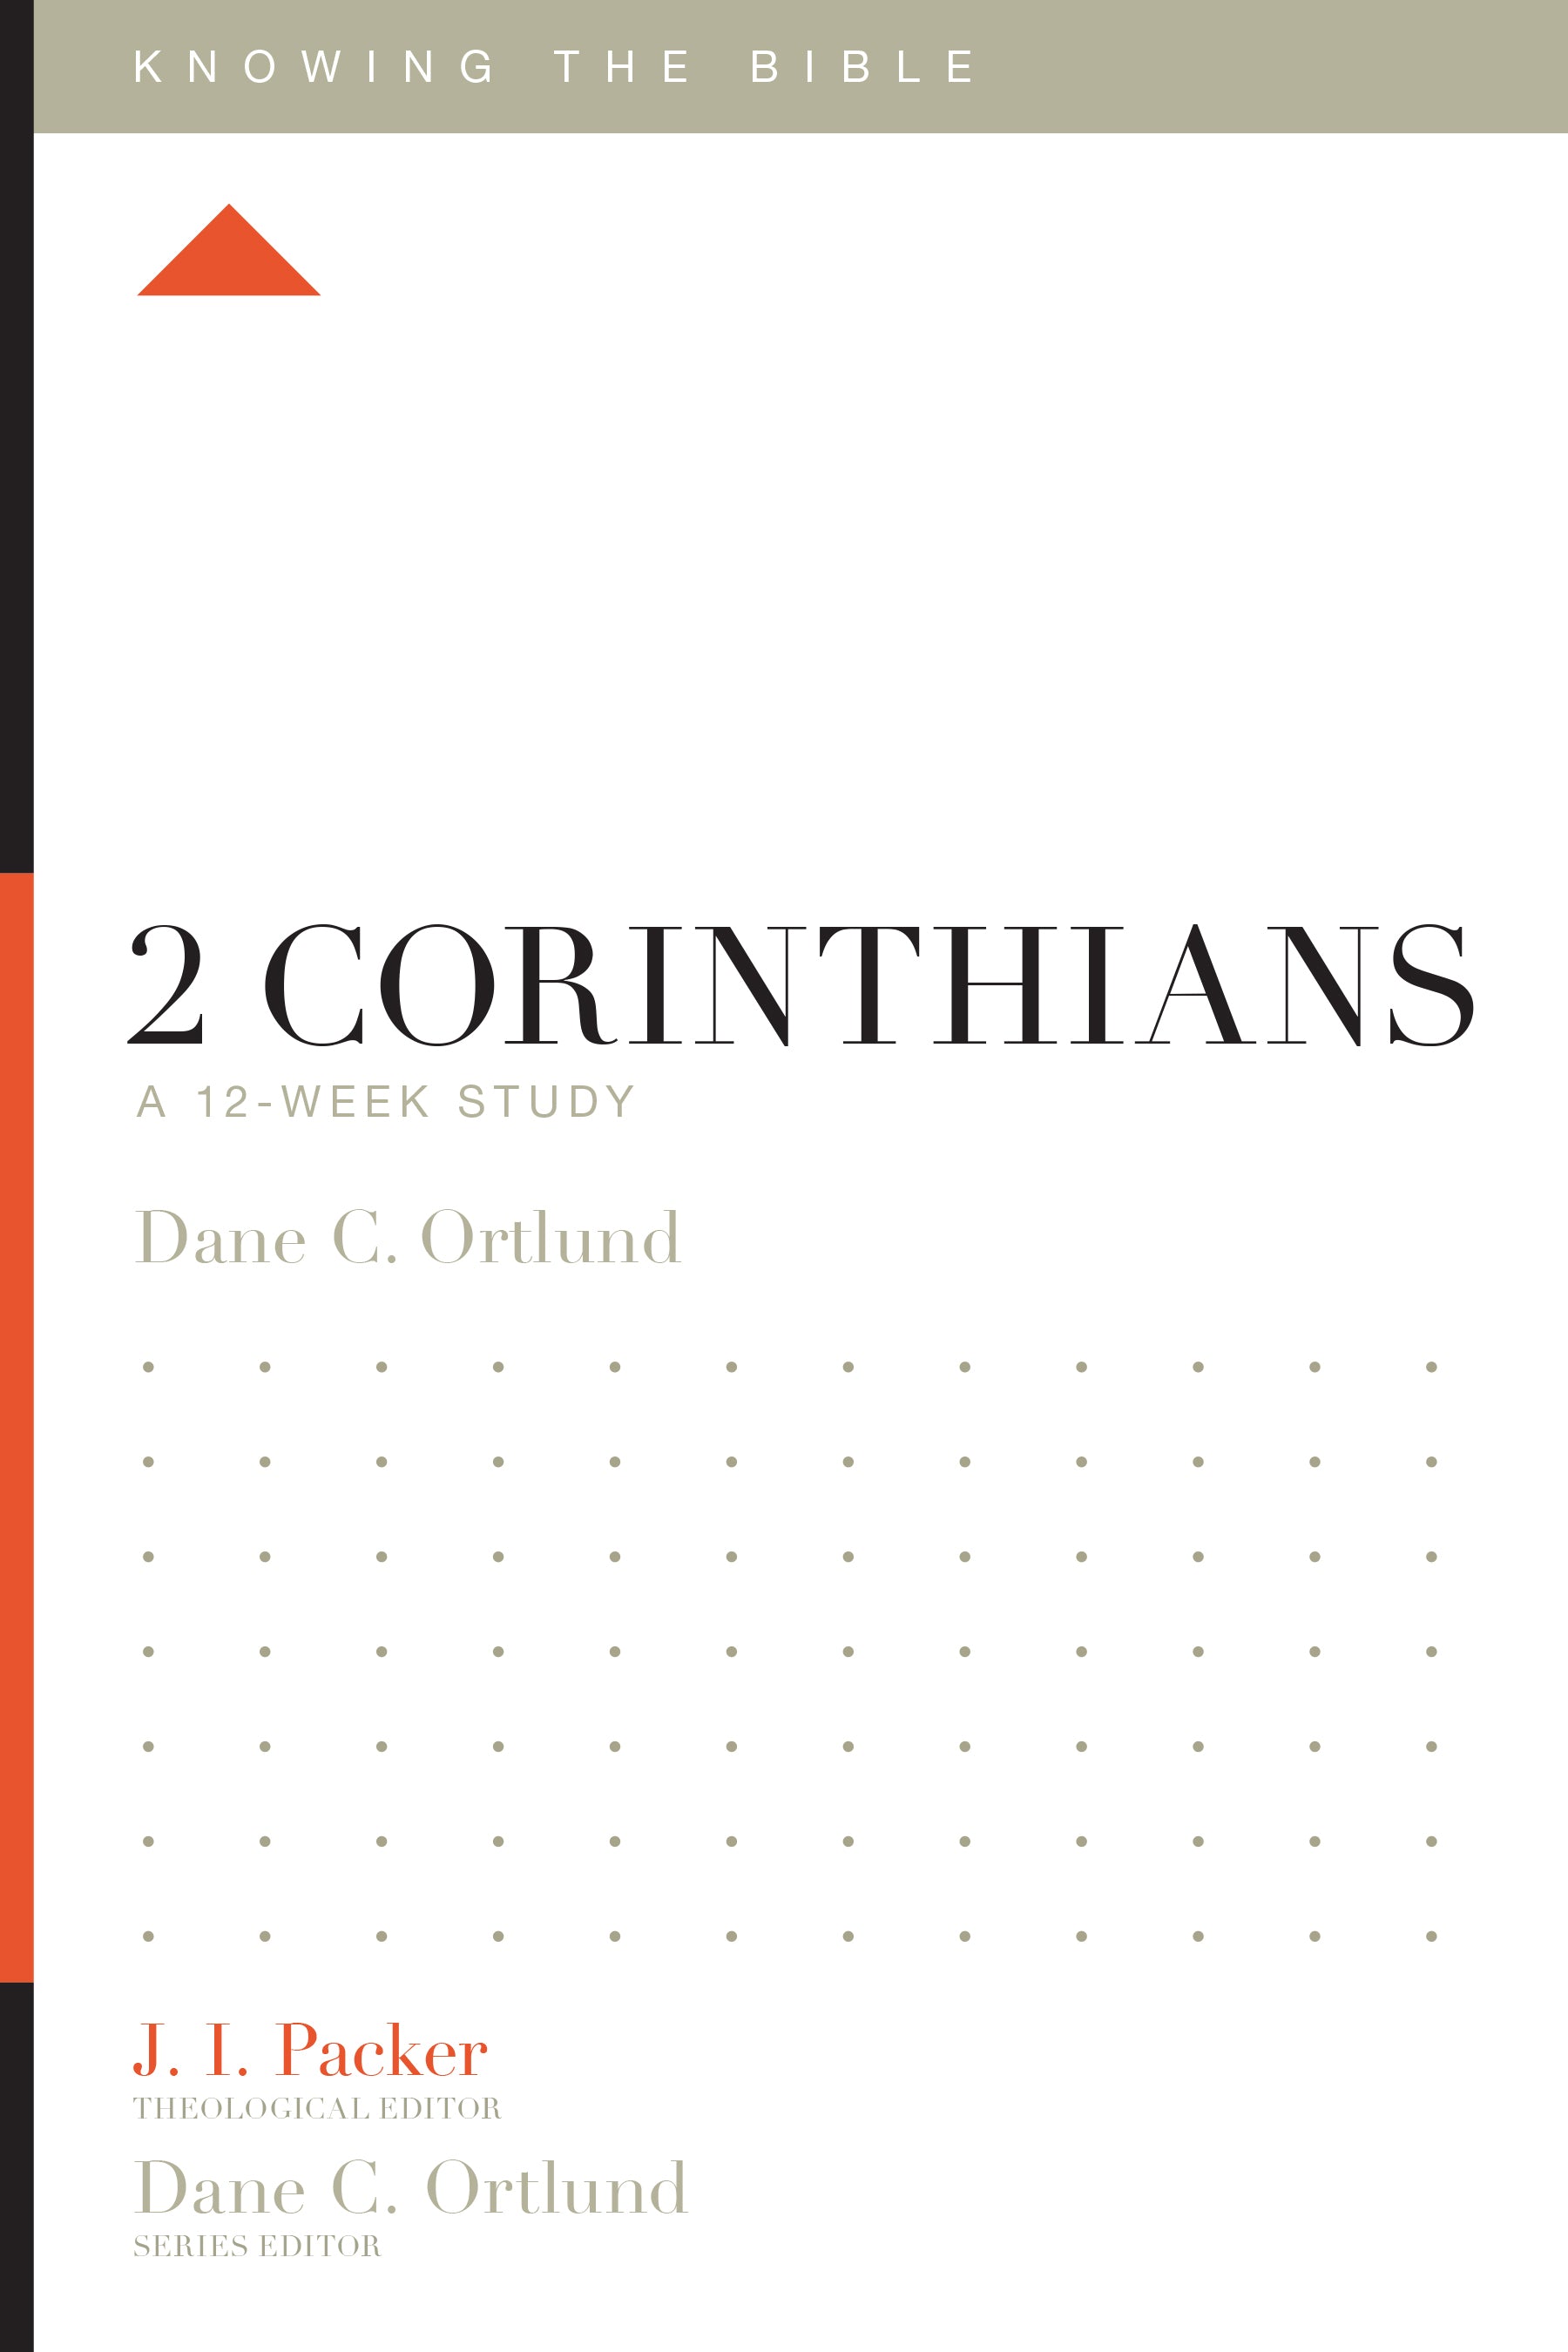 Image of 2 Corinthians other